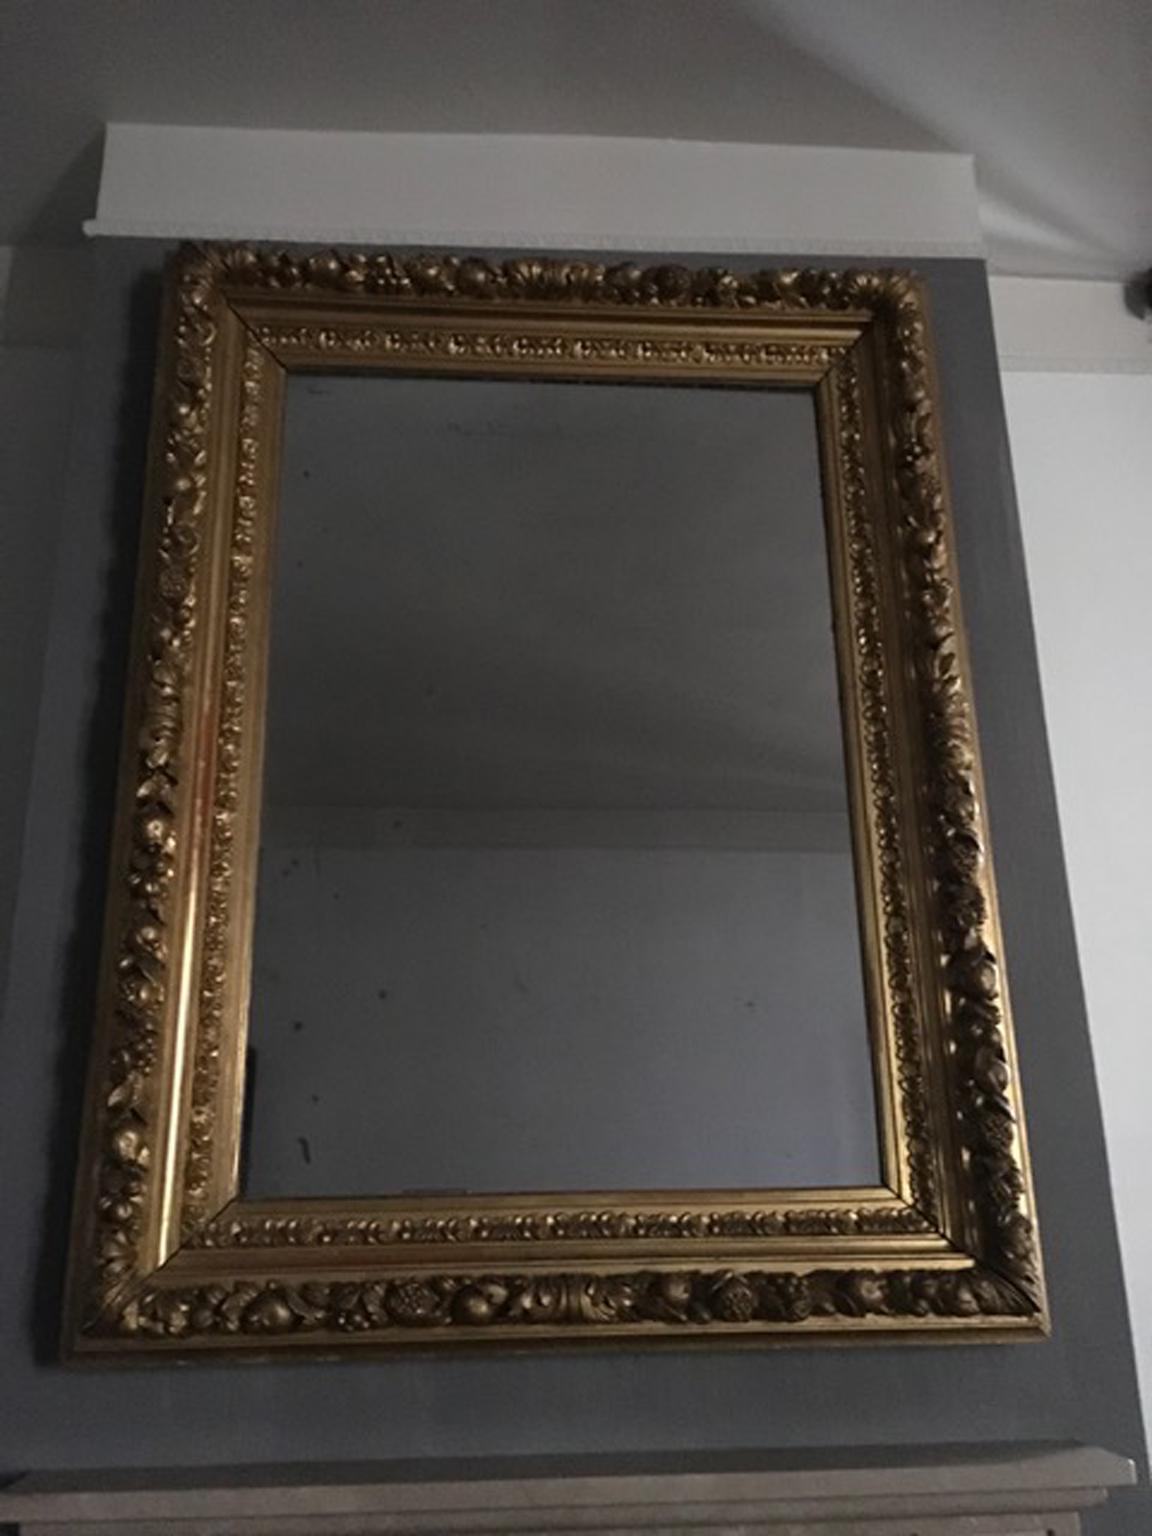 This a gorgeous mirrors in a golden wood frame with engraved fruits and flowers, full of details.
It is visible a red color, where the gold is fading, that is the basis color used in the past for the gold finish.
The fruit is the pomegranate, symbol